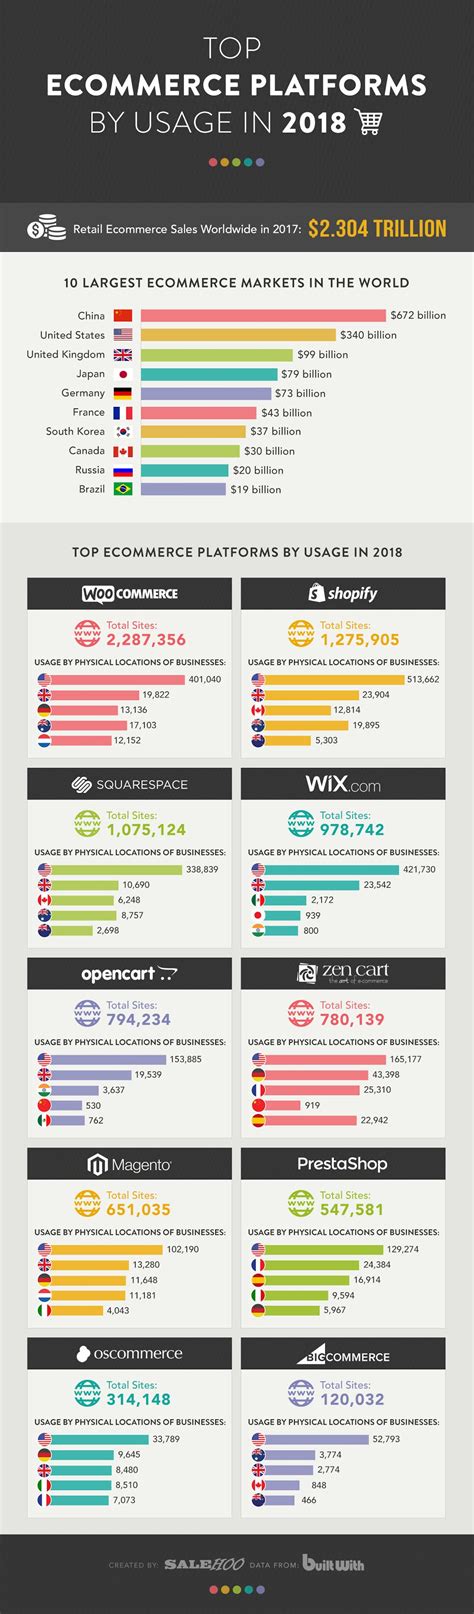 Top 10 E Commerce Platforms By Usage In 2018 Infographic